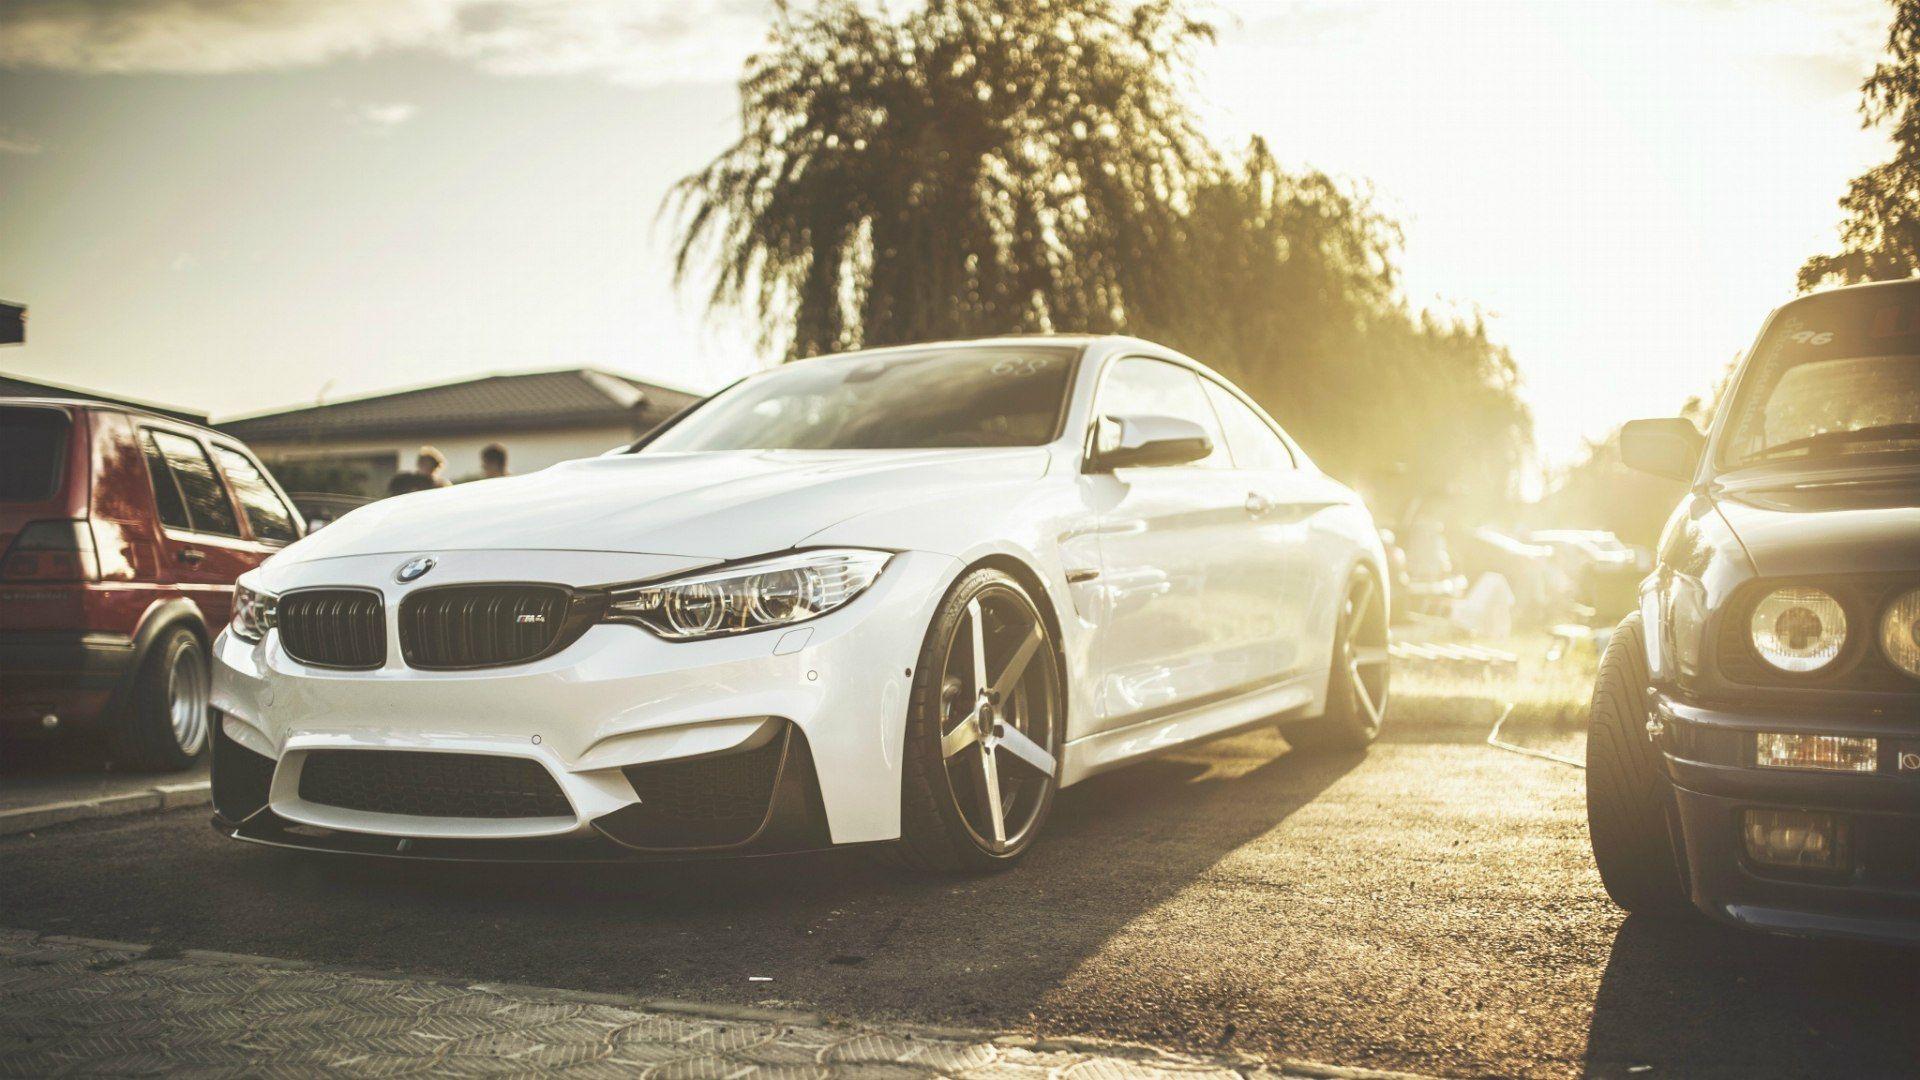 White car BMW M4 wallpaper and image, picture, photo